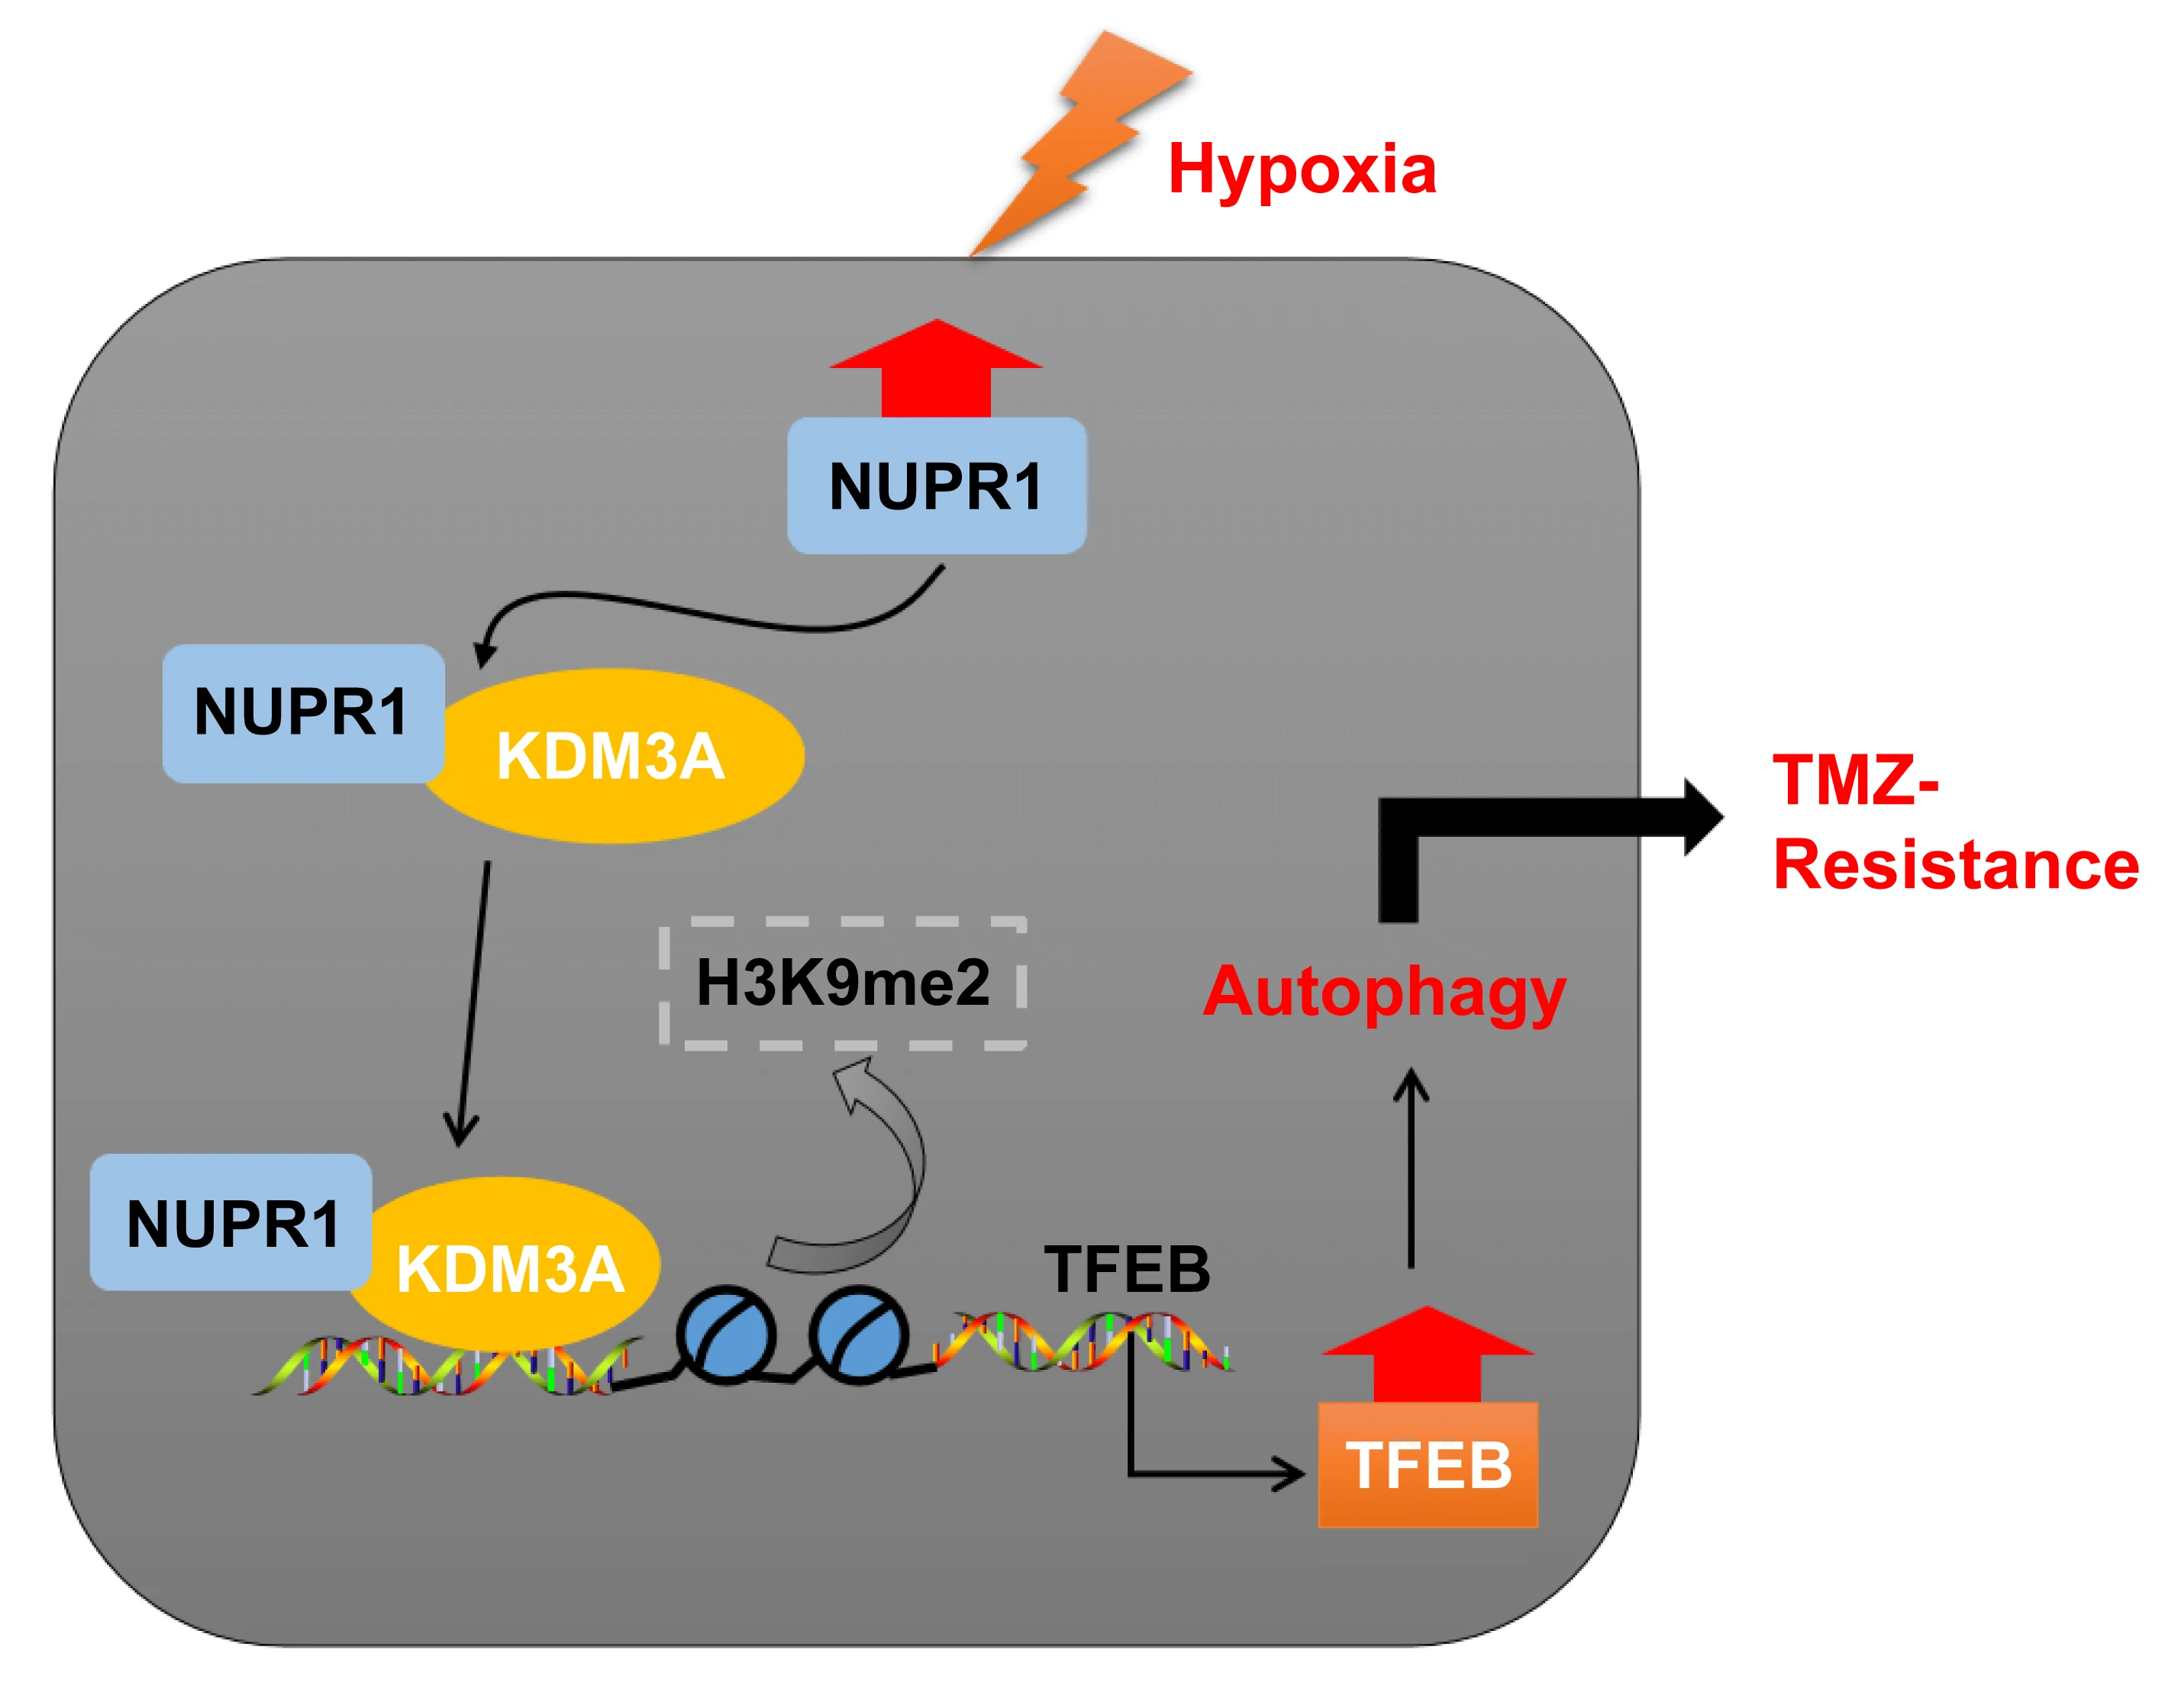 Mechanism of NURP1 in temozolomide resistance in hypoxia-treated glioma cells via the KDM3A/TFEB axis